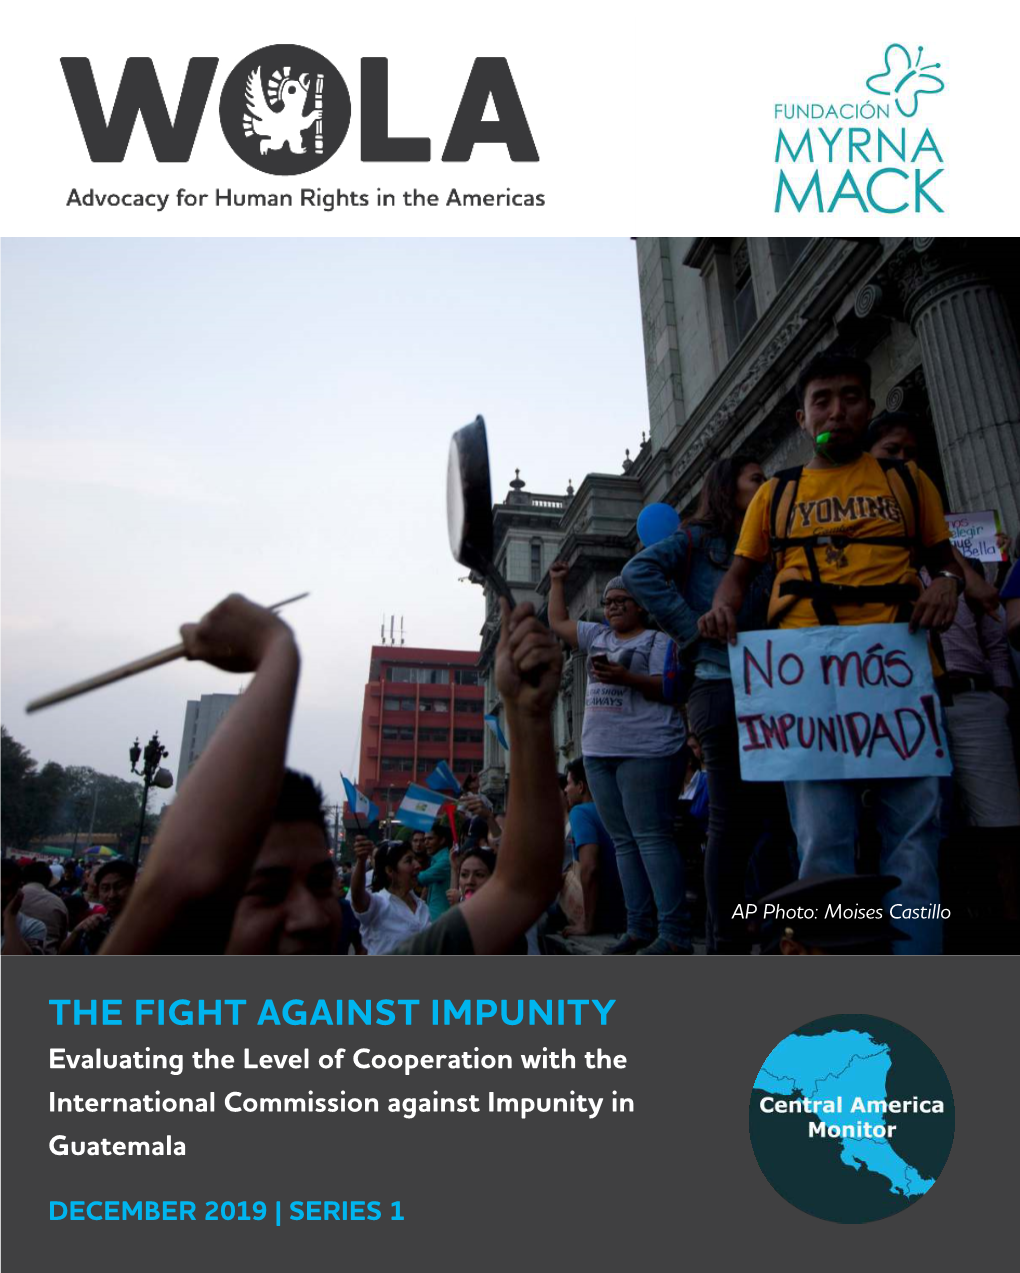 THE FIGHT AGAINST IMPUNITY Evaluating the Level of Cooperation with the International Commission Against Impunity in Guatemala